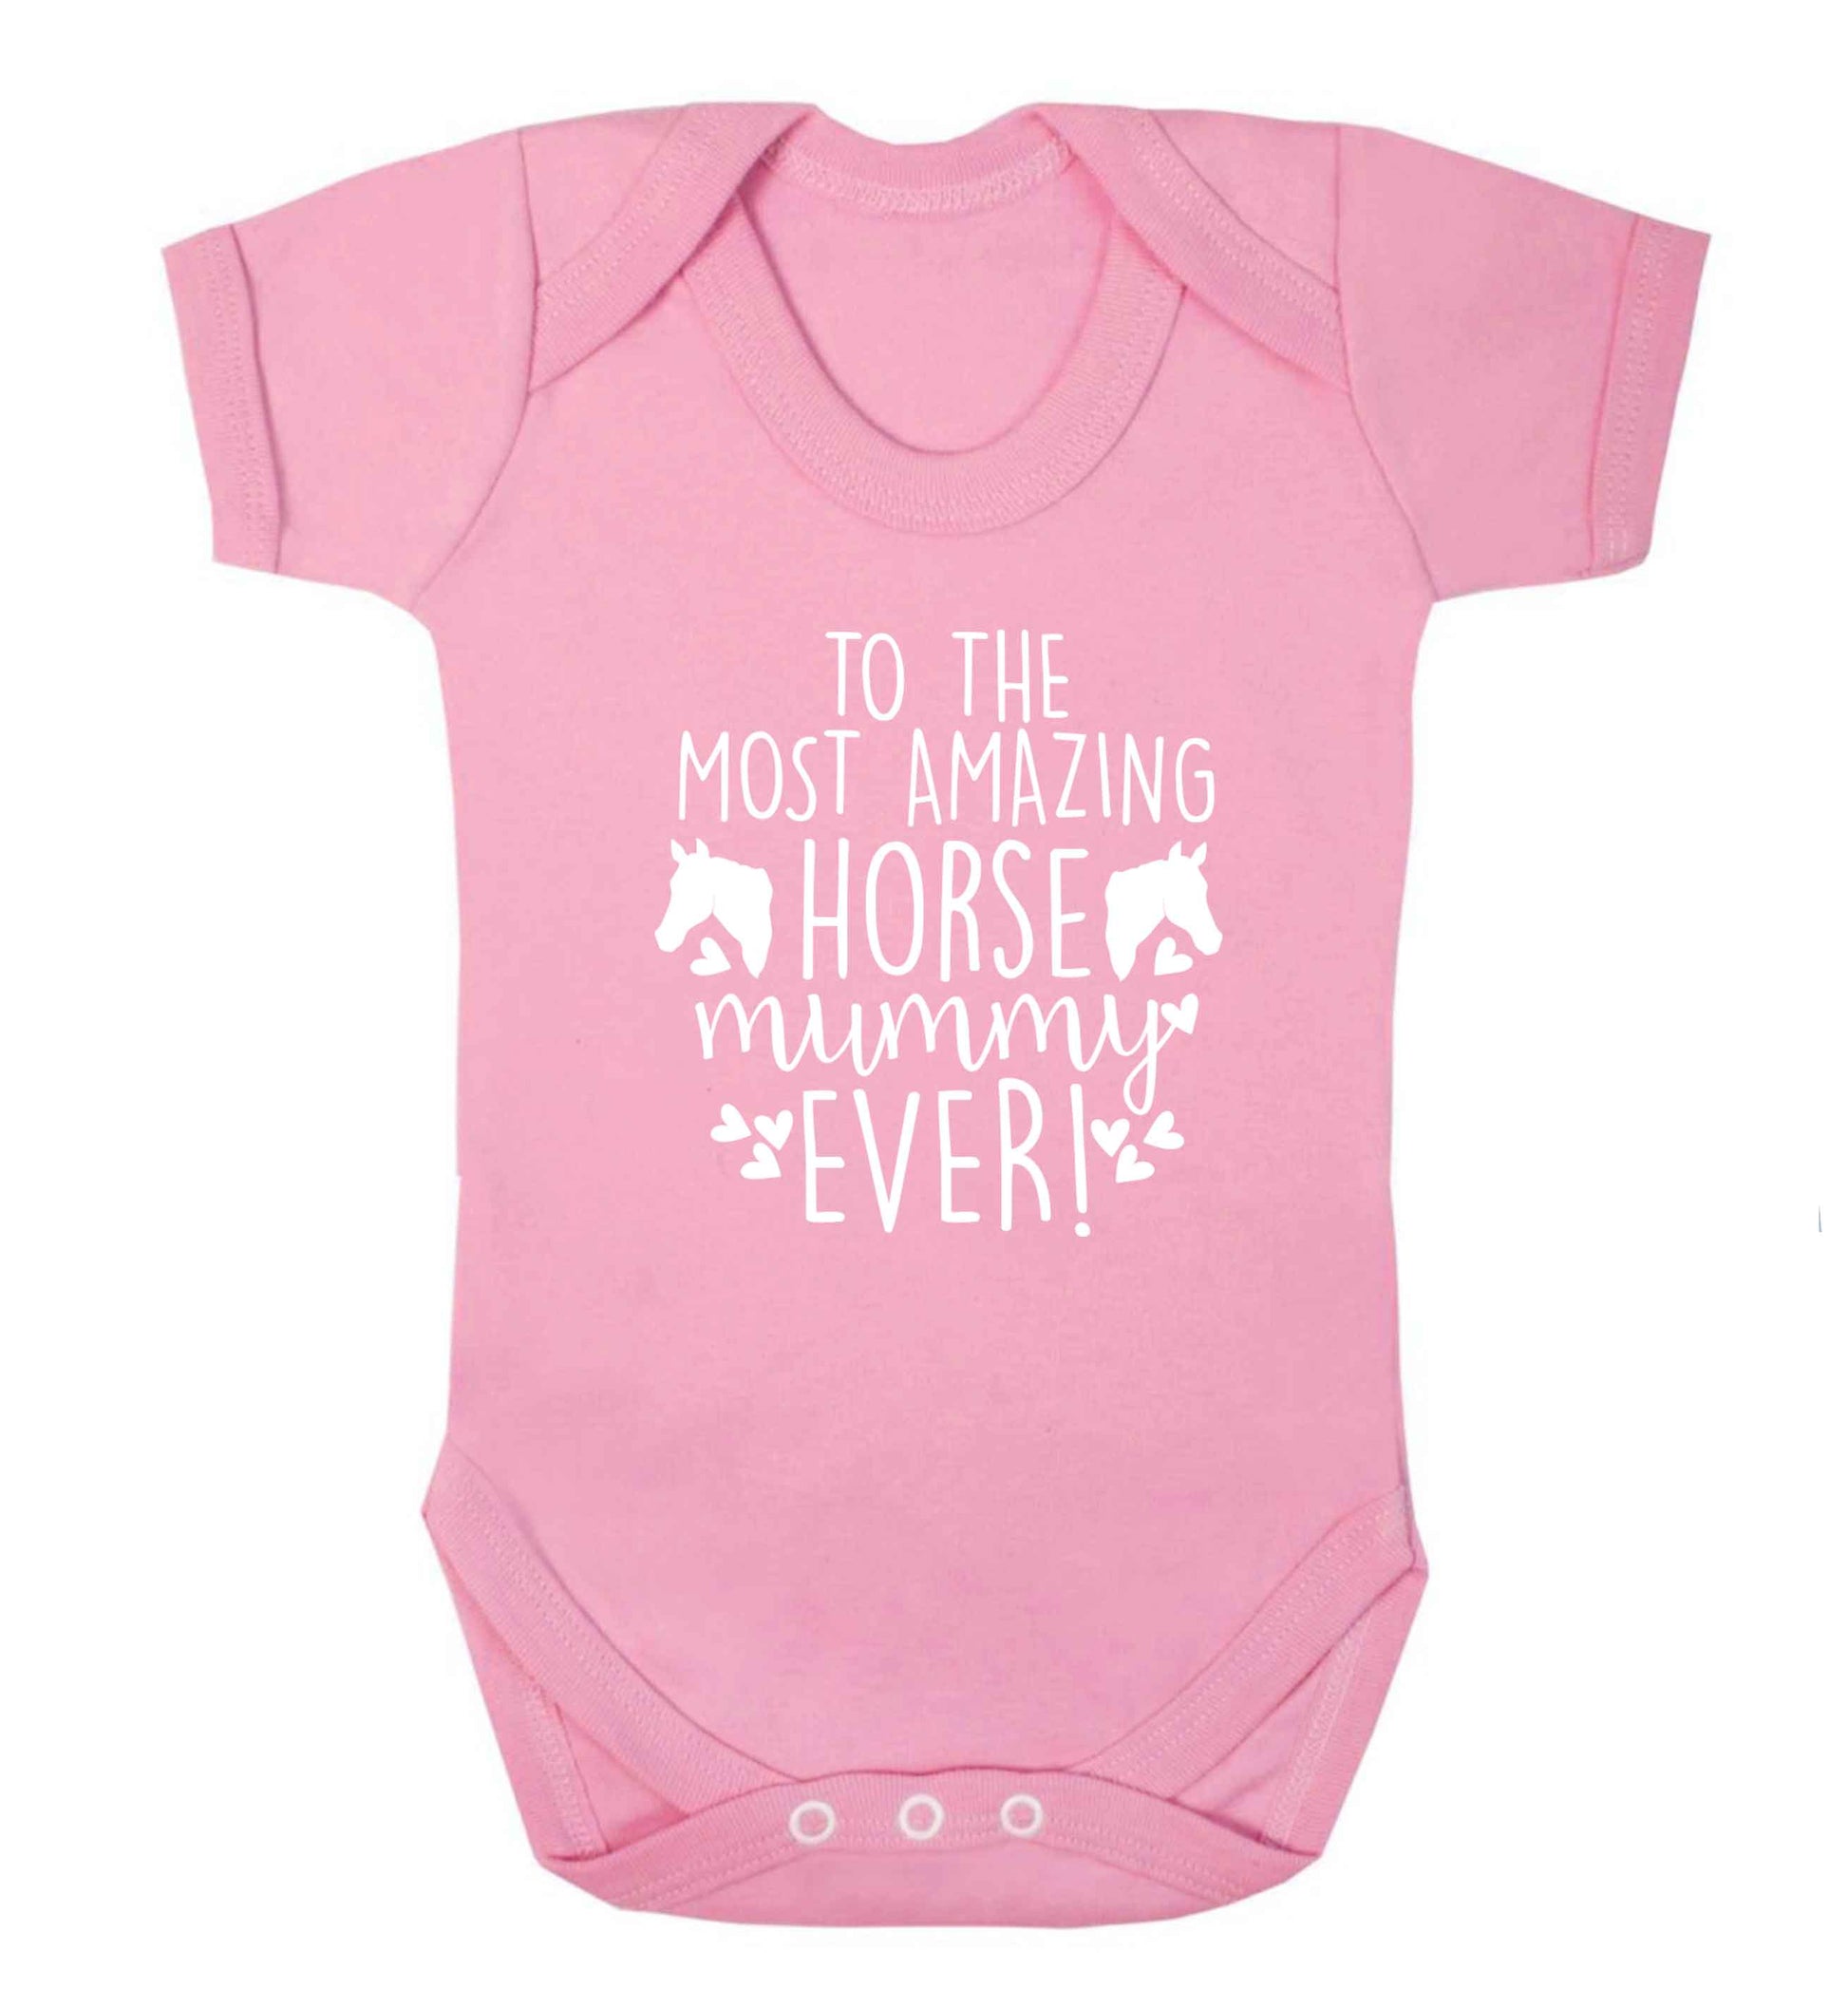 To the most amazing horse mummy ever! baby vest pale pink 18-24 months